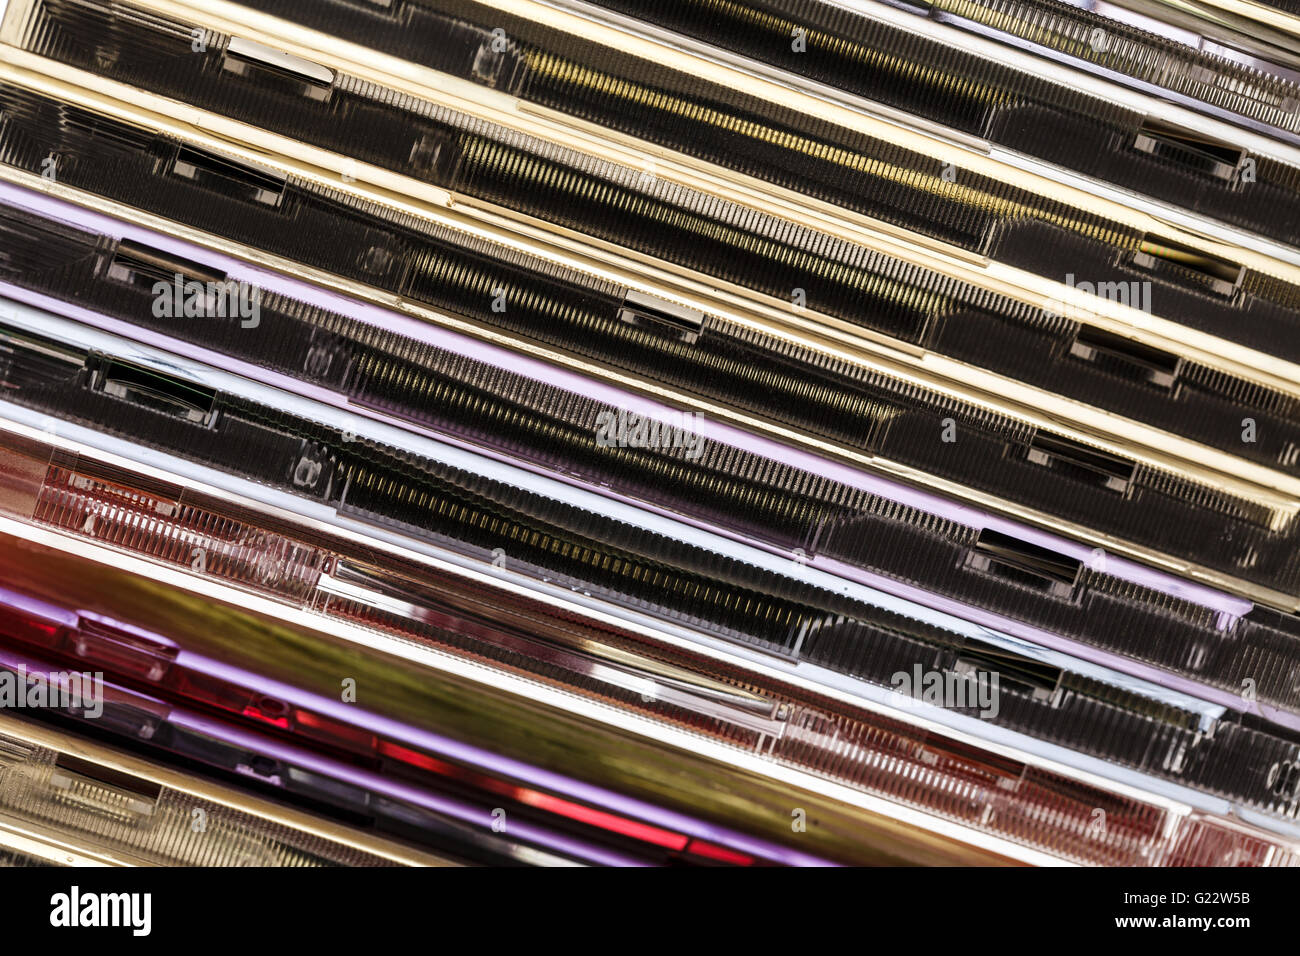 Pile of compact disks as background closeup Stock Photo